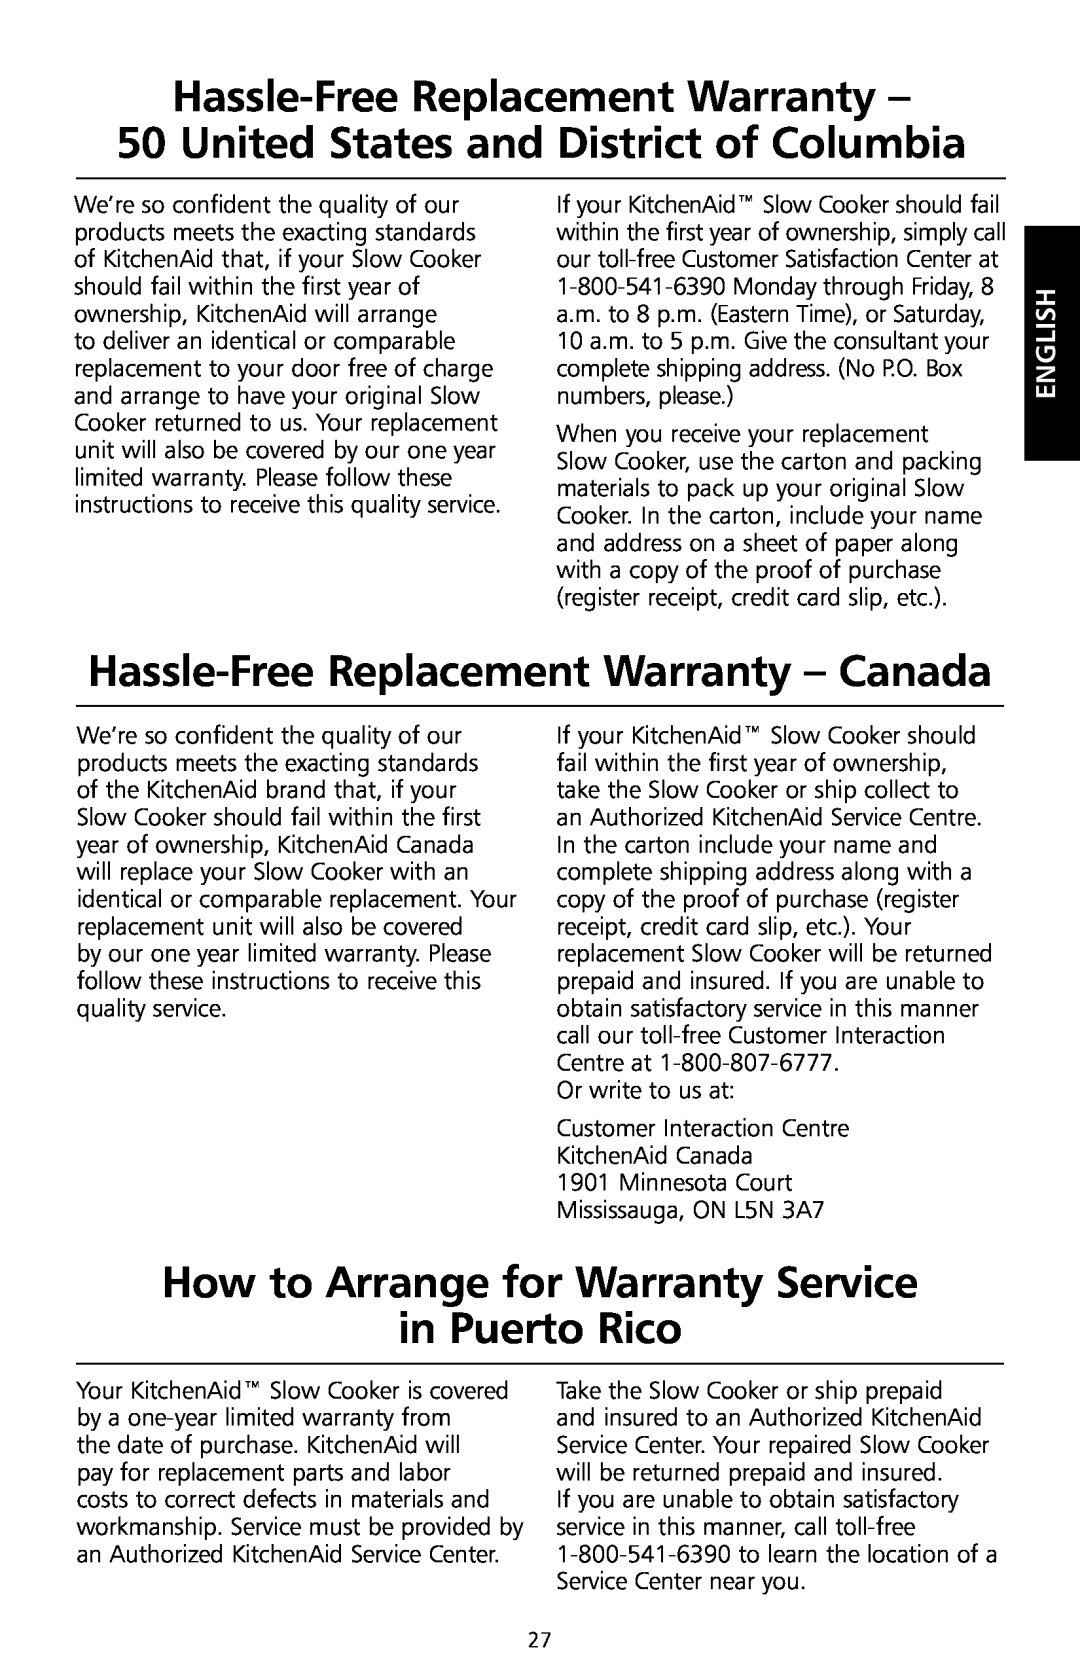 KitchenAid KSC700 manual Hassle-Free Replacement Warranty, United States and District of Columbia, English 